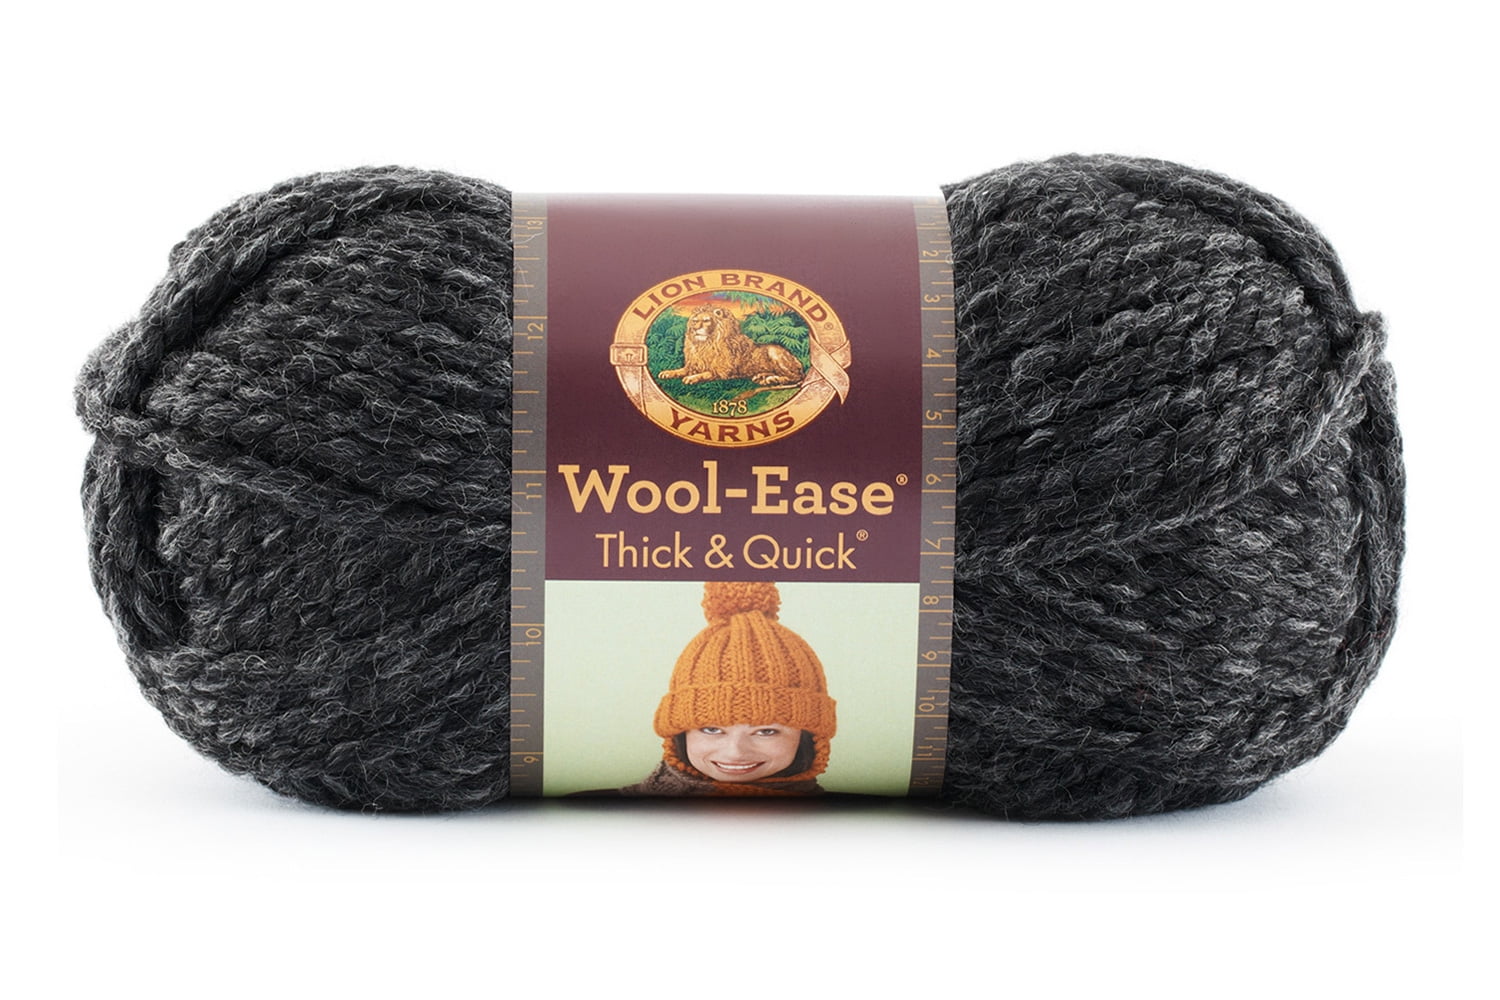 Lion Brand Charcoal Wool-Ease Thick & Quick Yarn